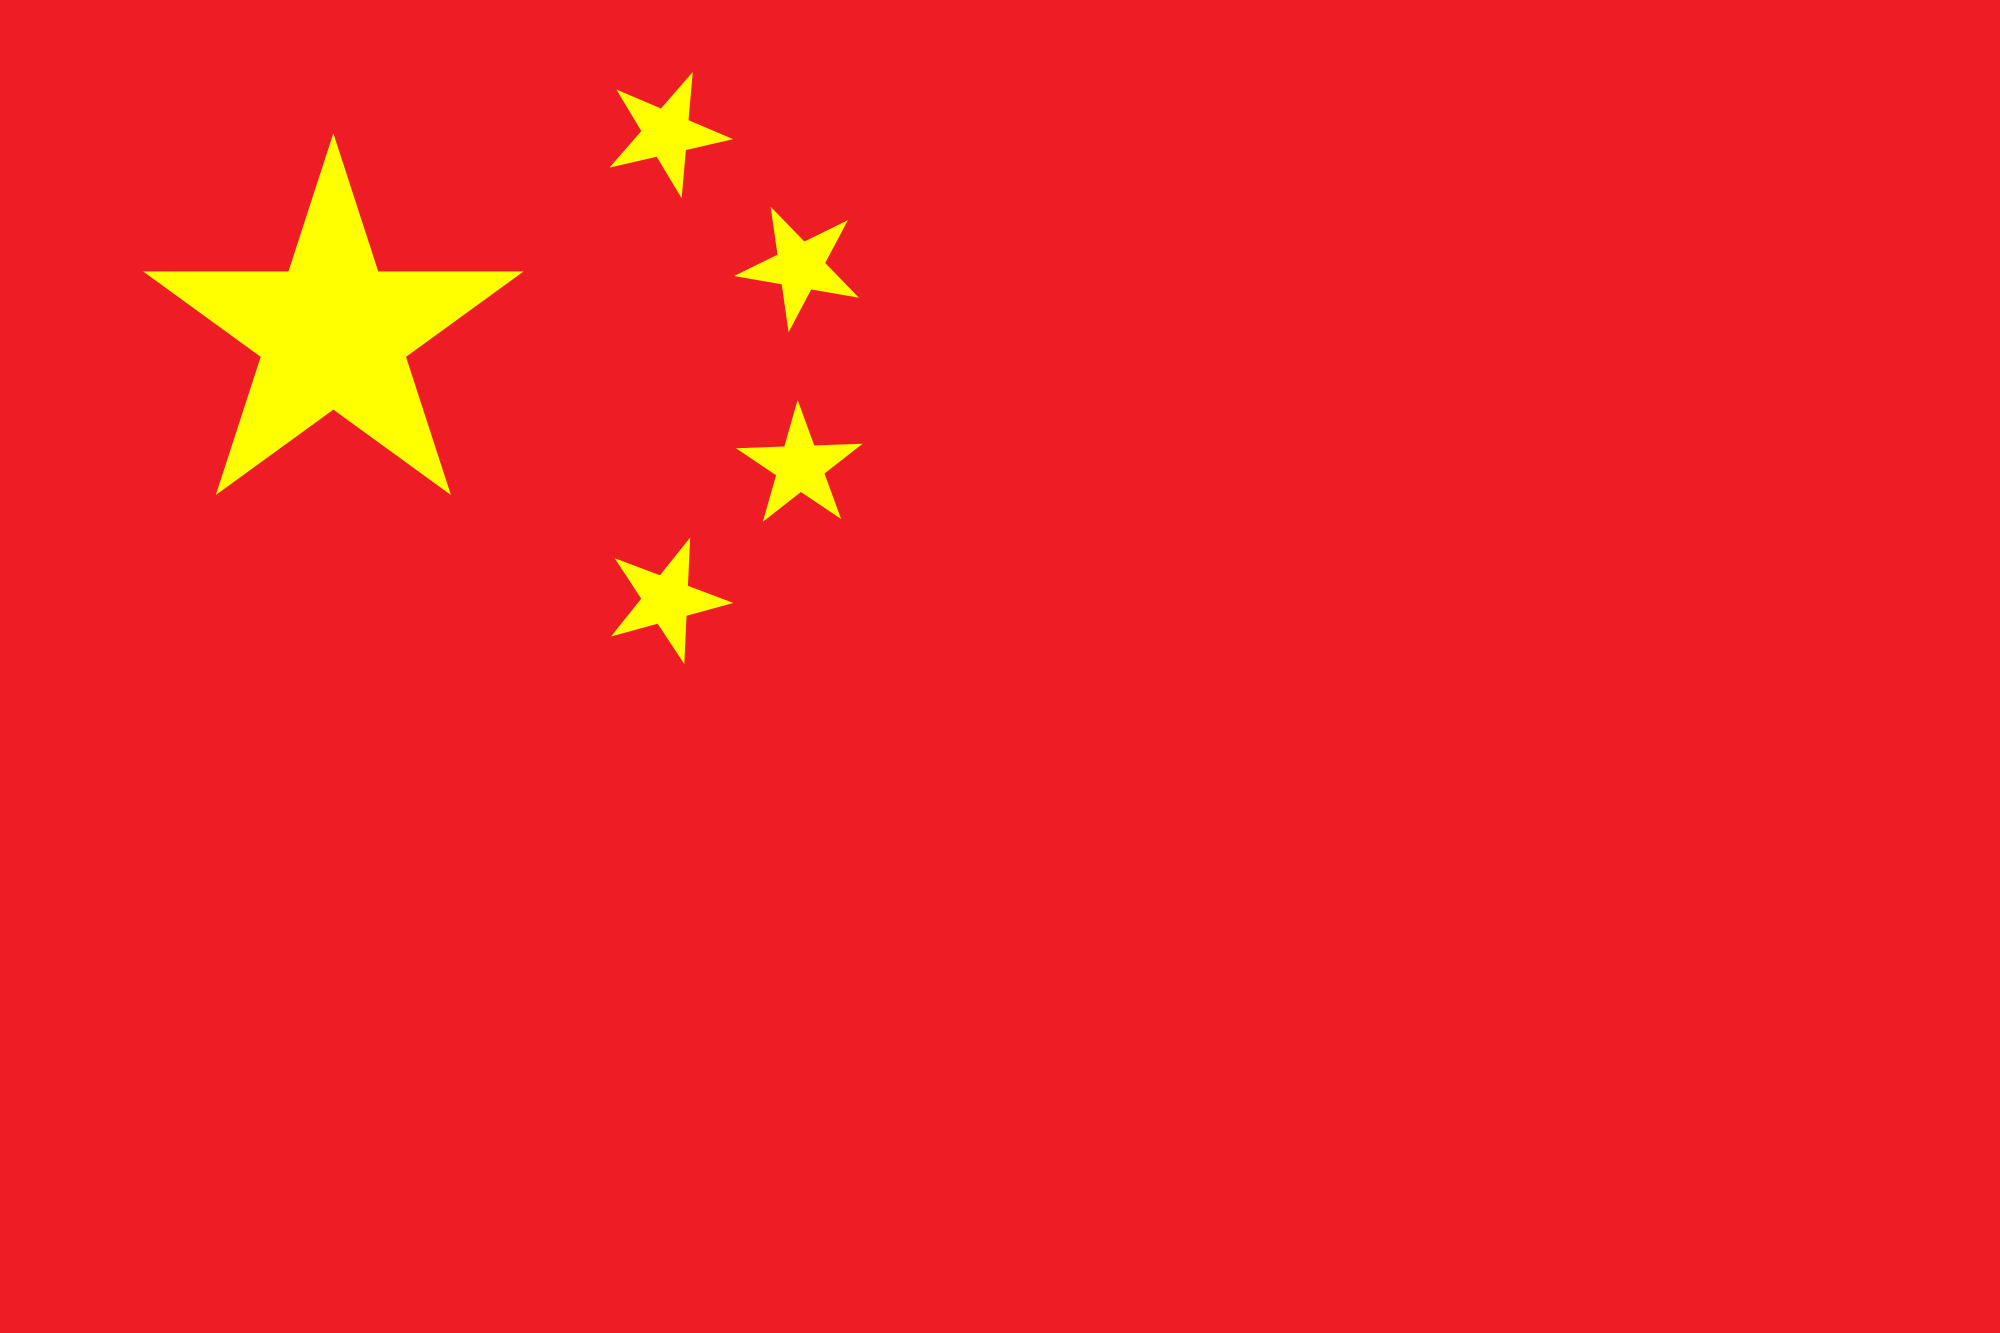 https://upload.wikimedia.org/wikipedia/commons/thumb/f/fa/Flag_of_the_People's_Republic_of_China.svg/2000px-Flag_of_the_People's_Republic_of_China.svg.png